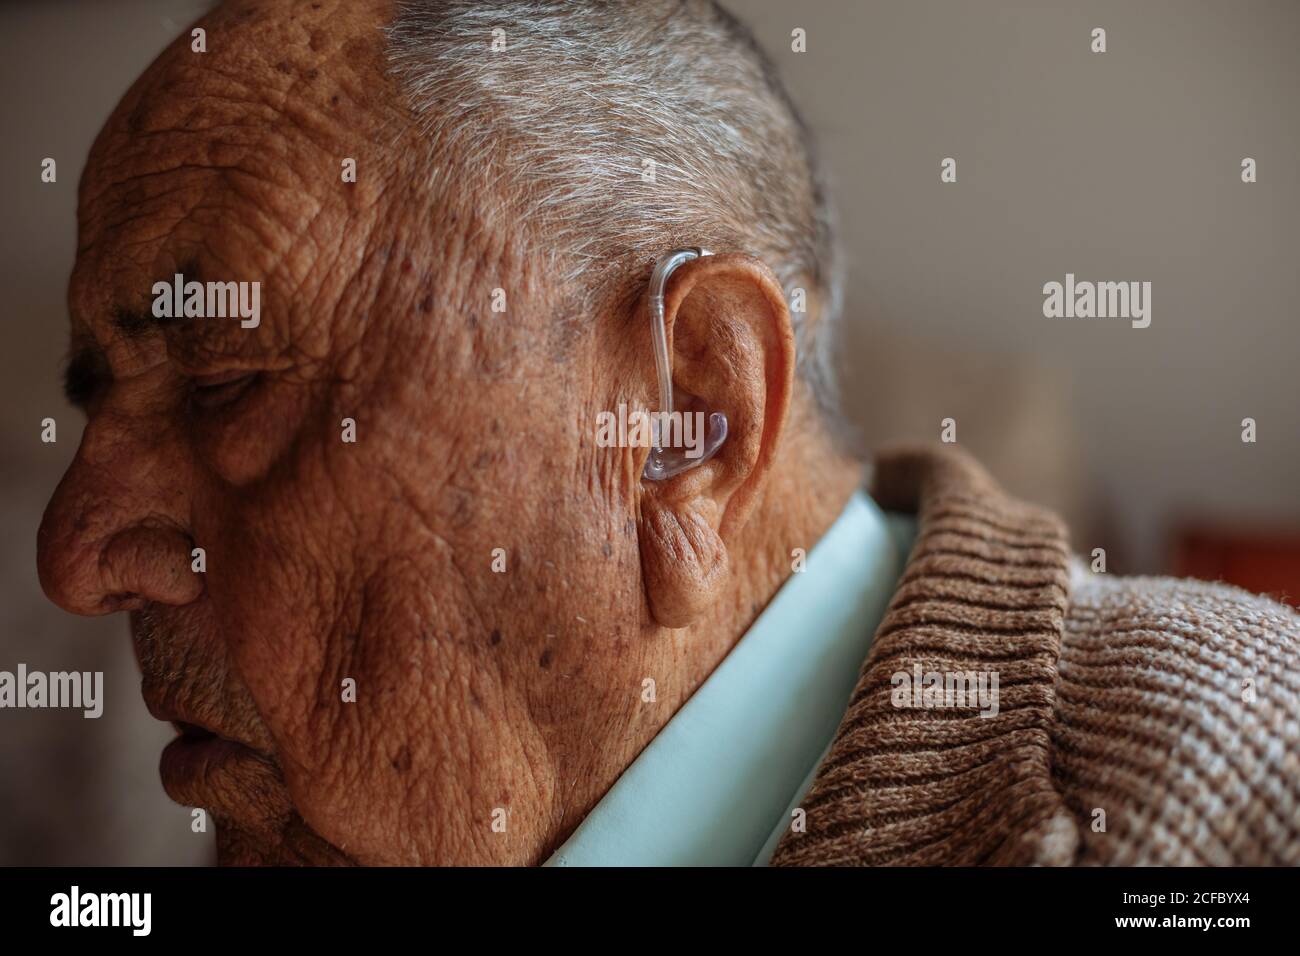 Detail of a hearing aid in an old man Stock Photo